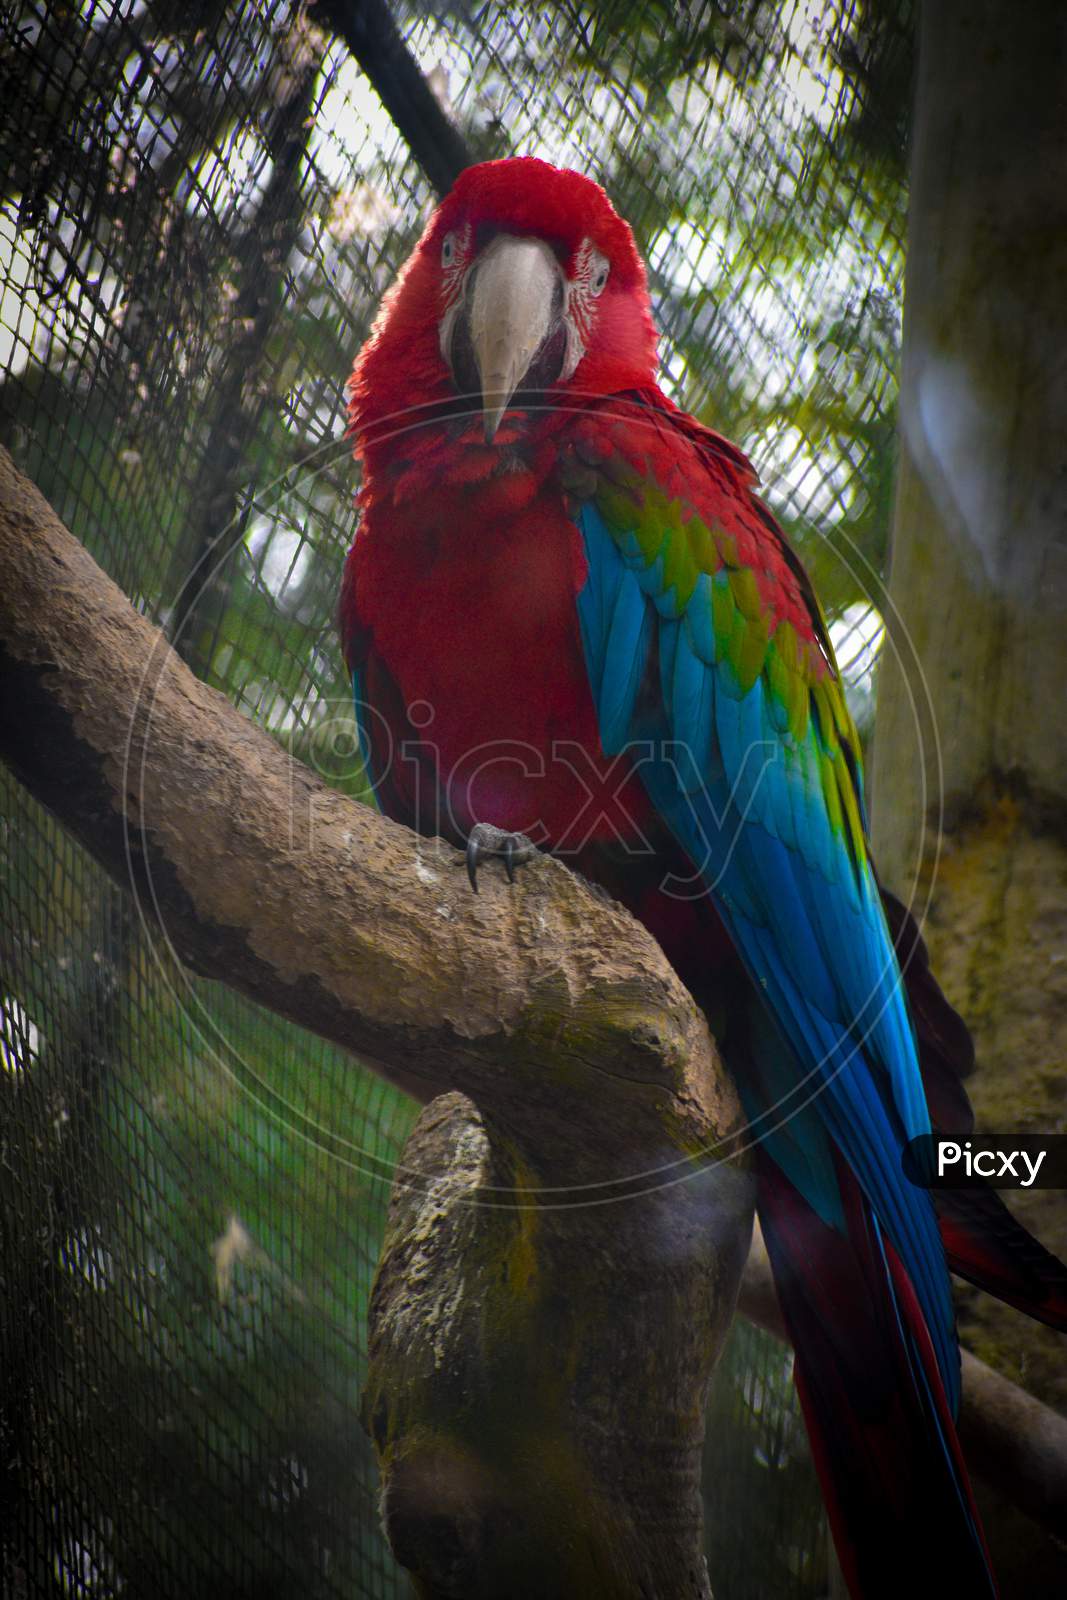 The Macaw parrot